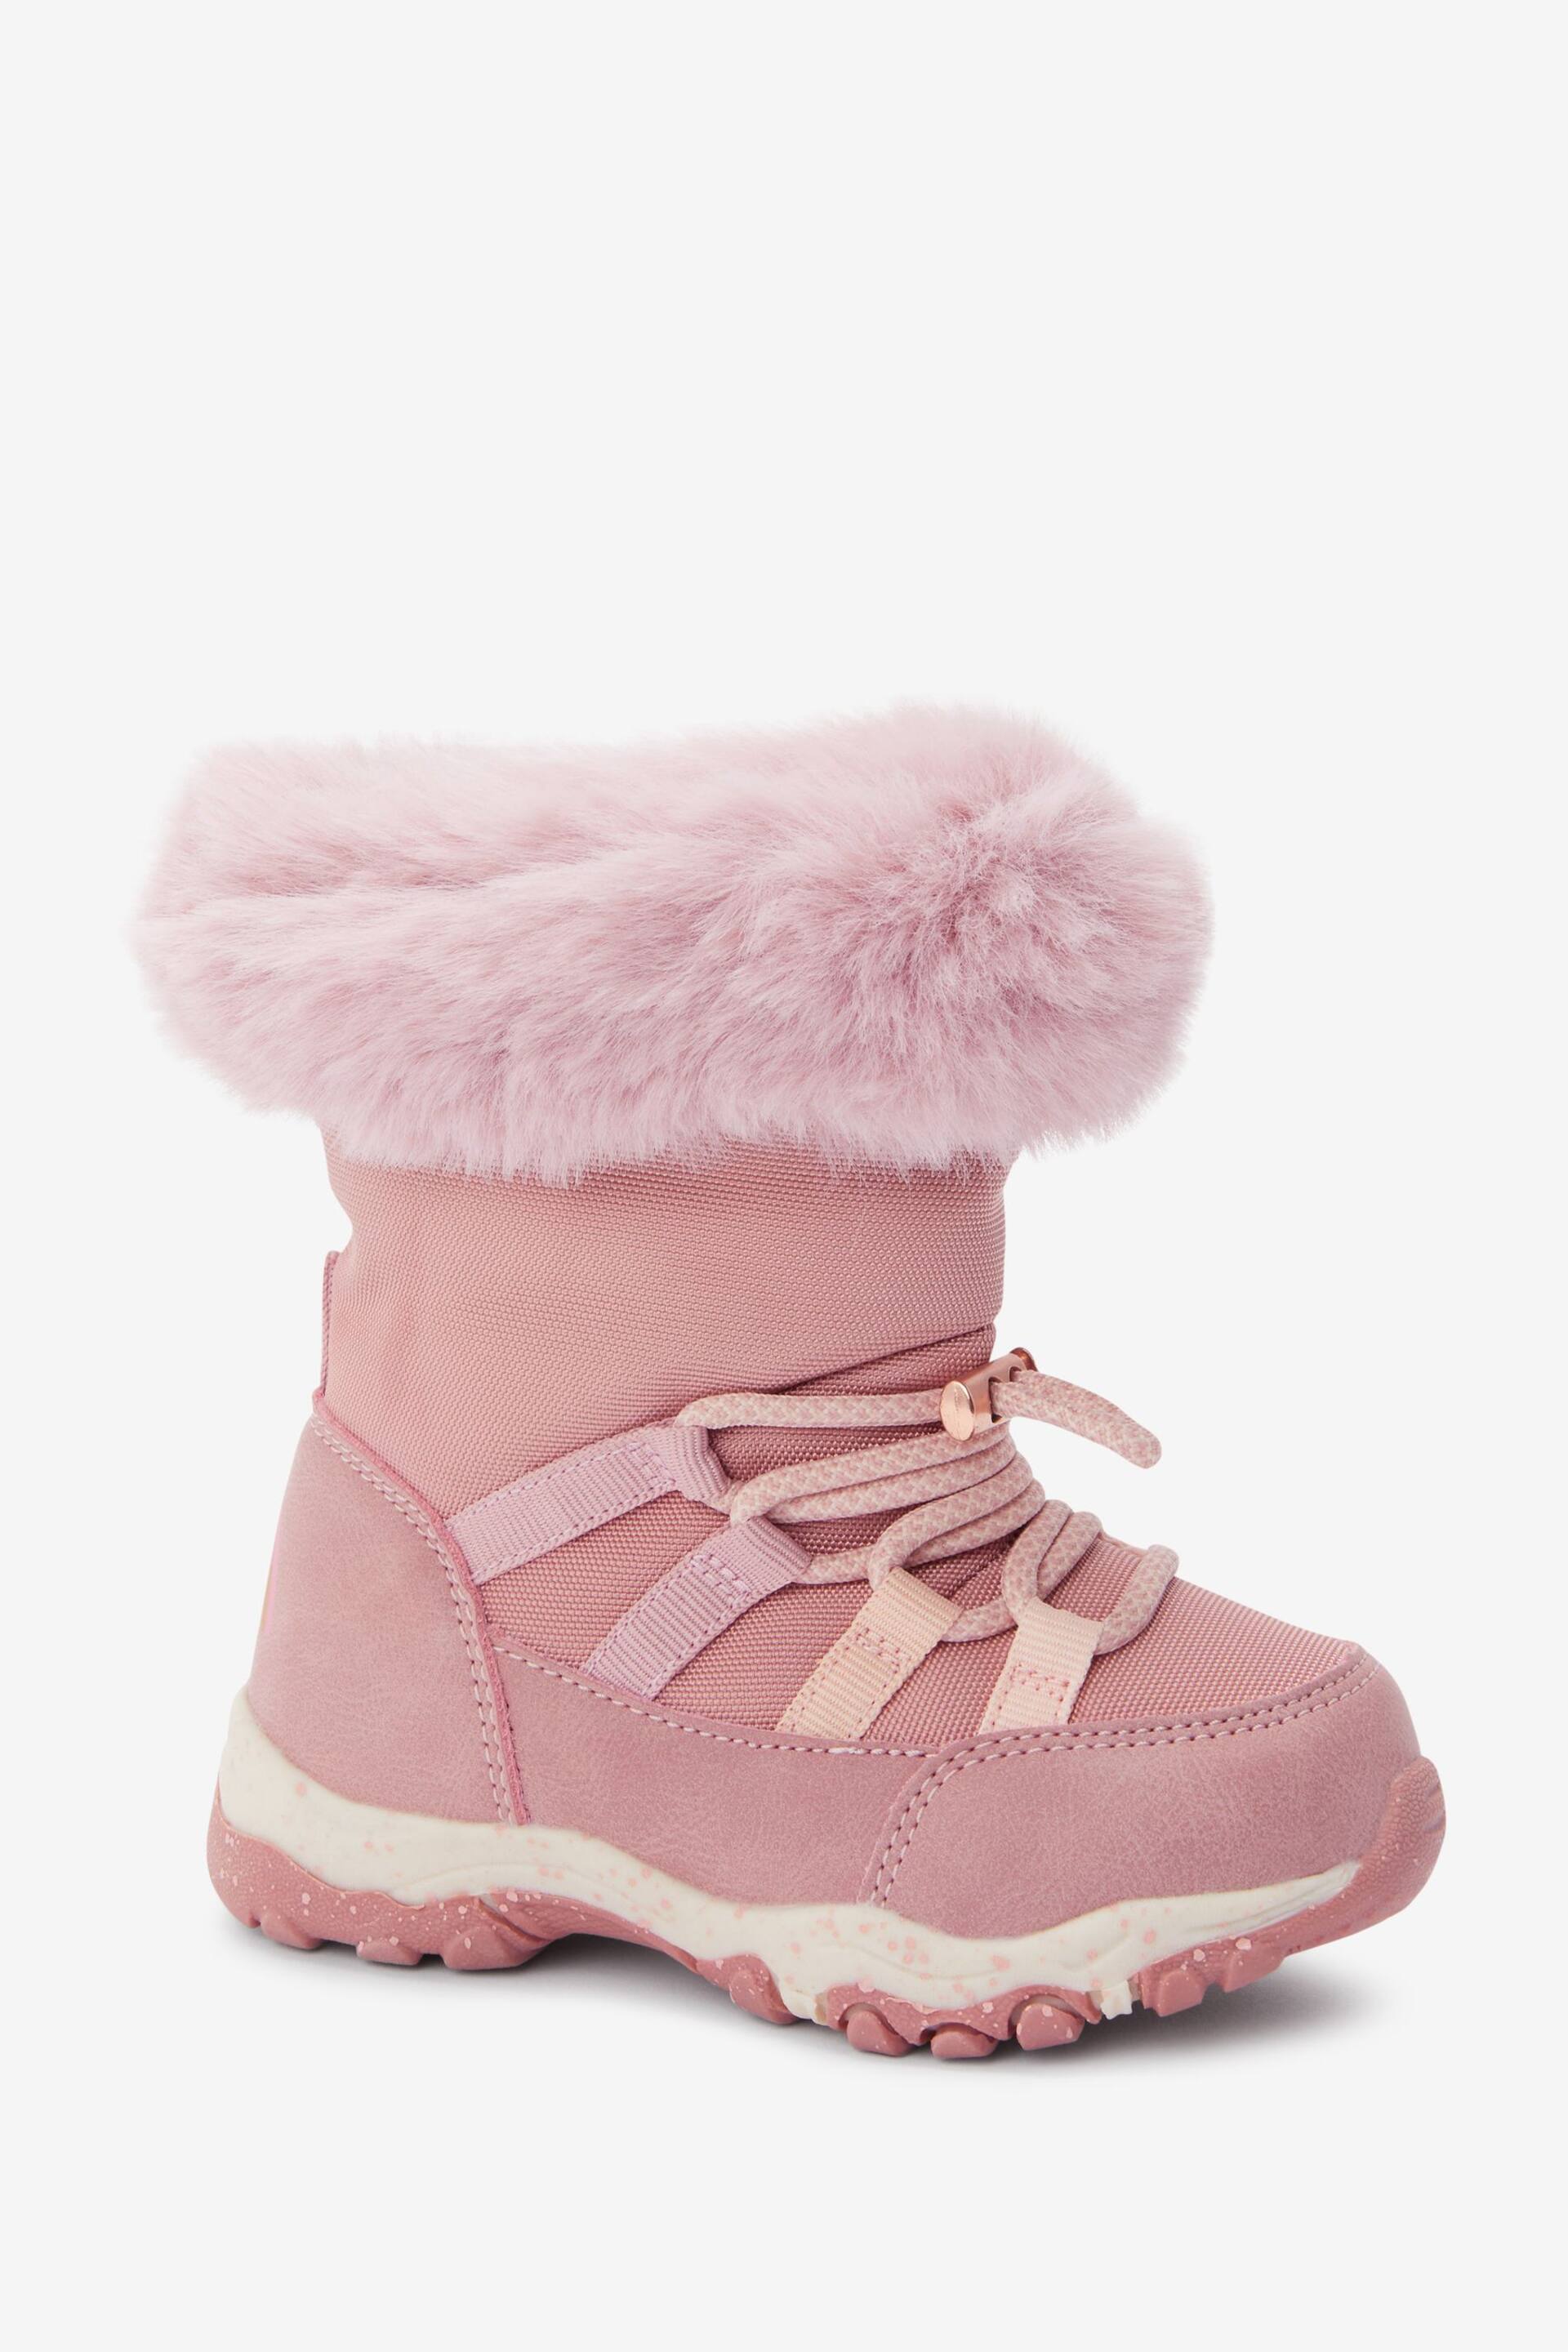 Pink Water Resistant Warm Lined Snow Boots - Image 2 of 5